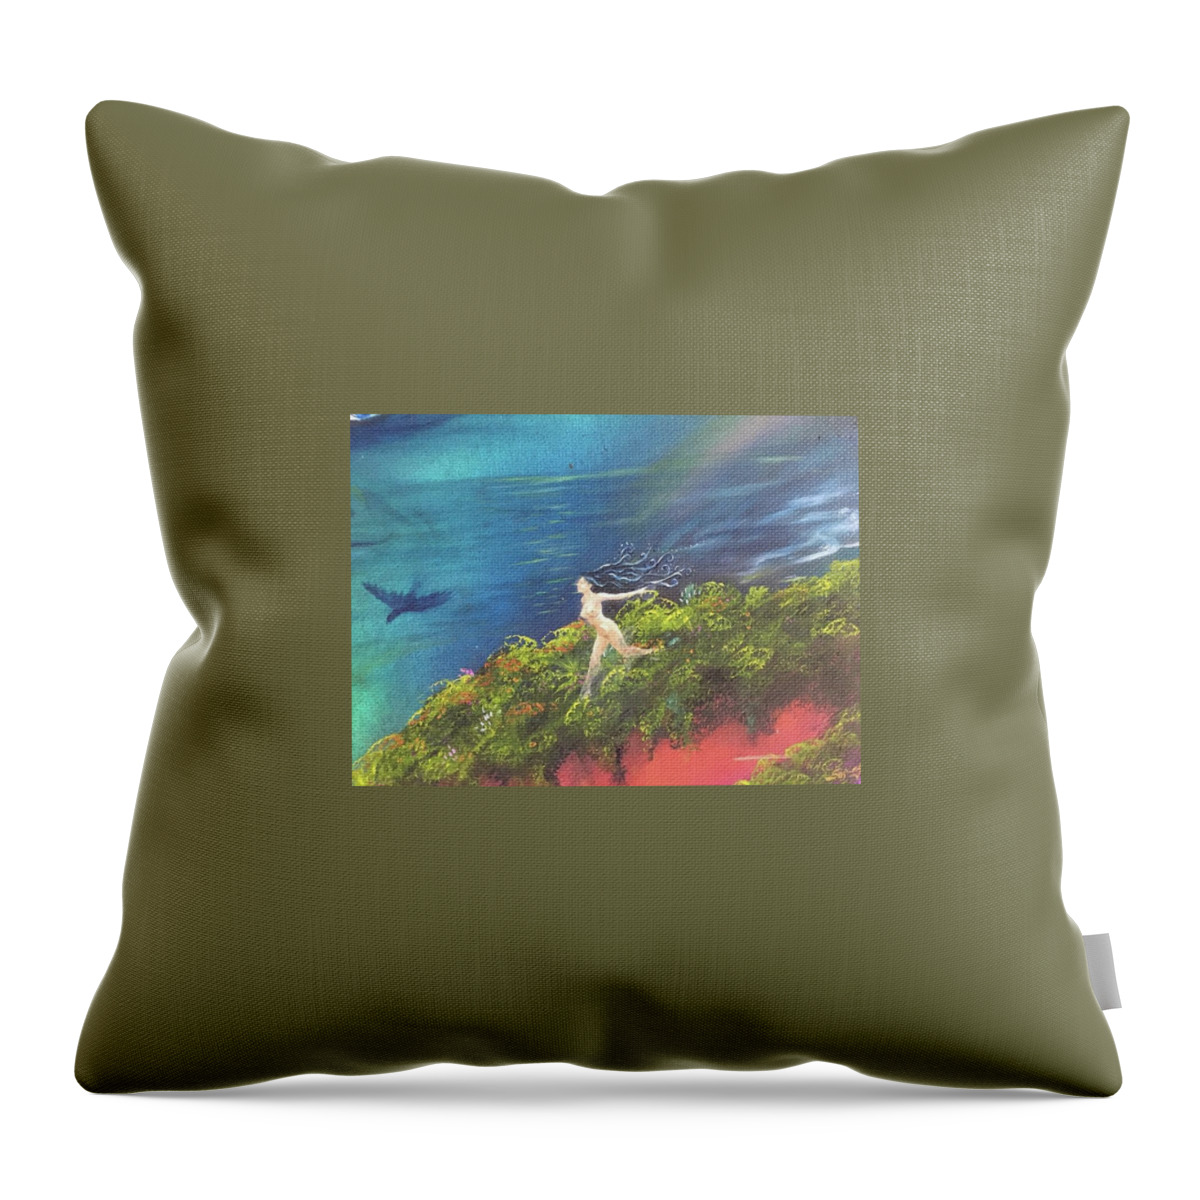 Masks Throw Pillow featuring the painting Chase Your Vision by Sofanya White